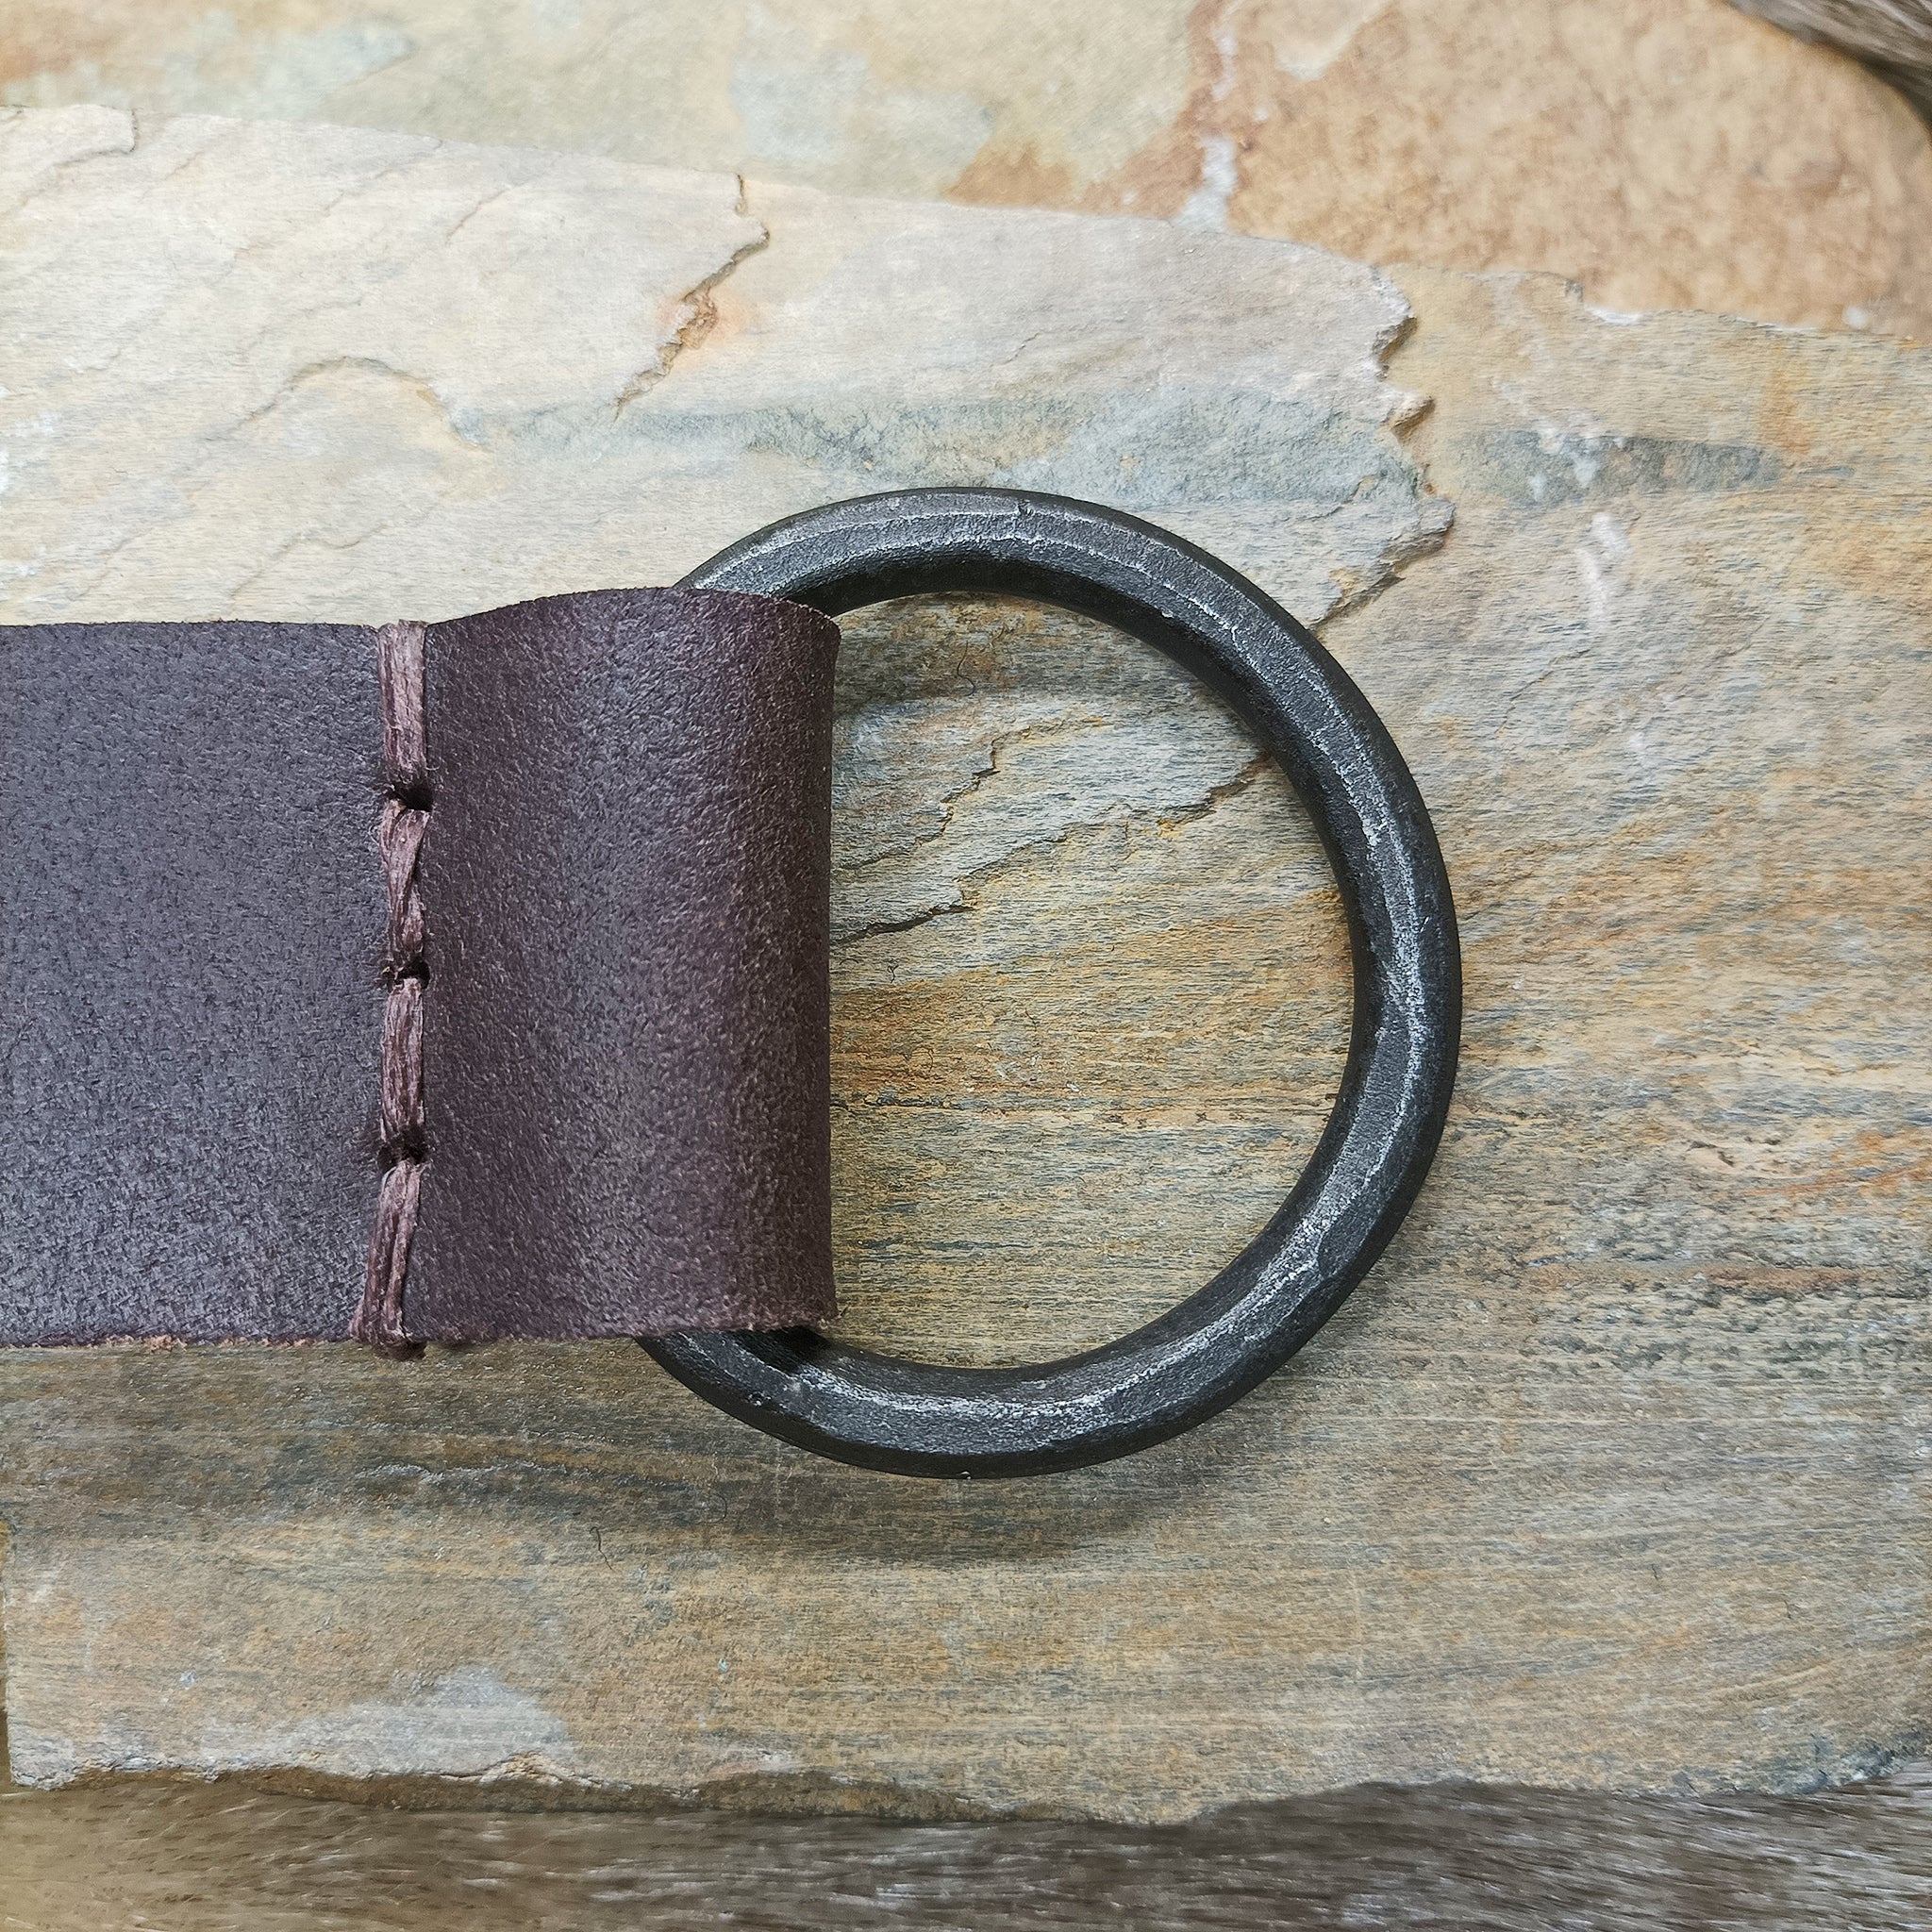 Hand-Forged Large Iron O Ring - Used as Belt Buckle